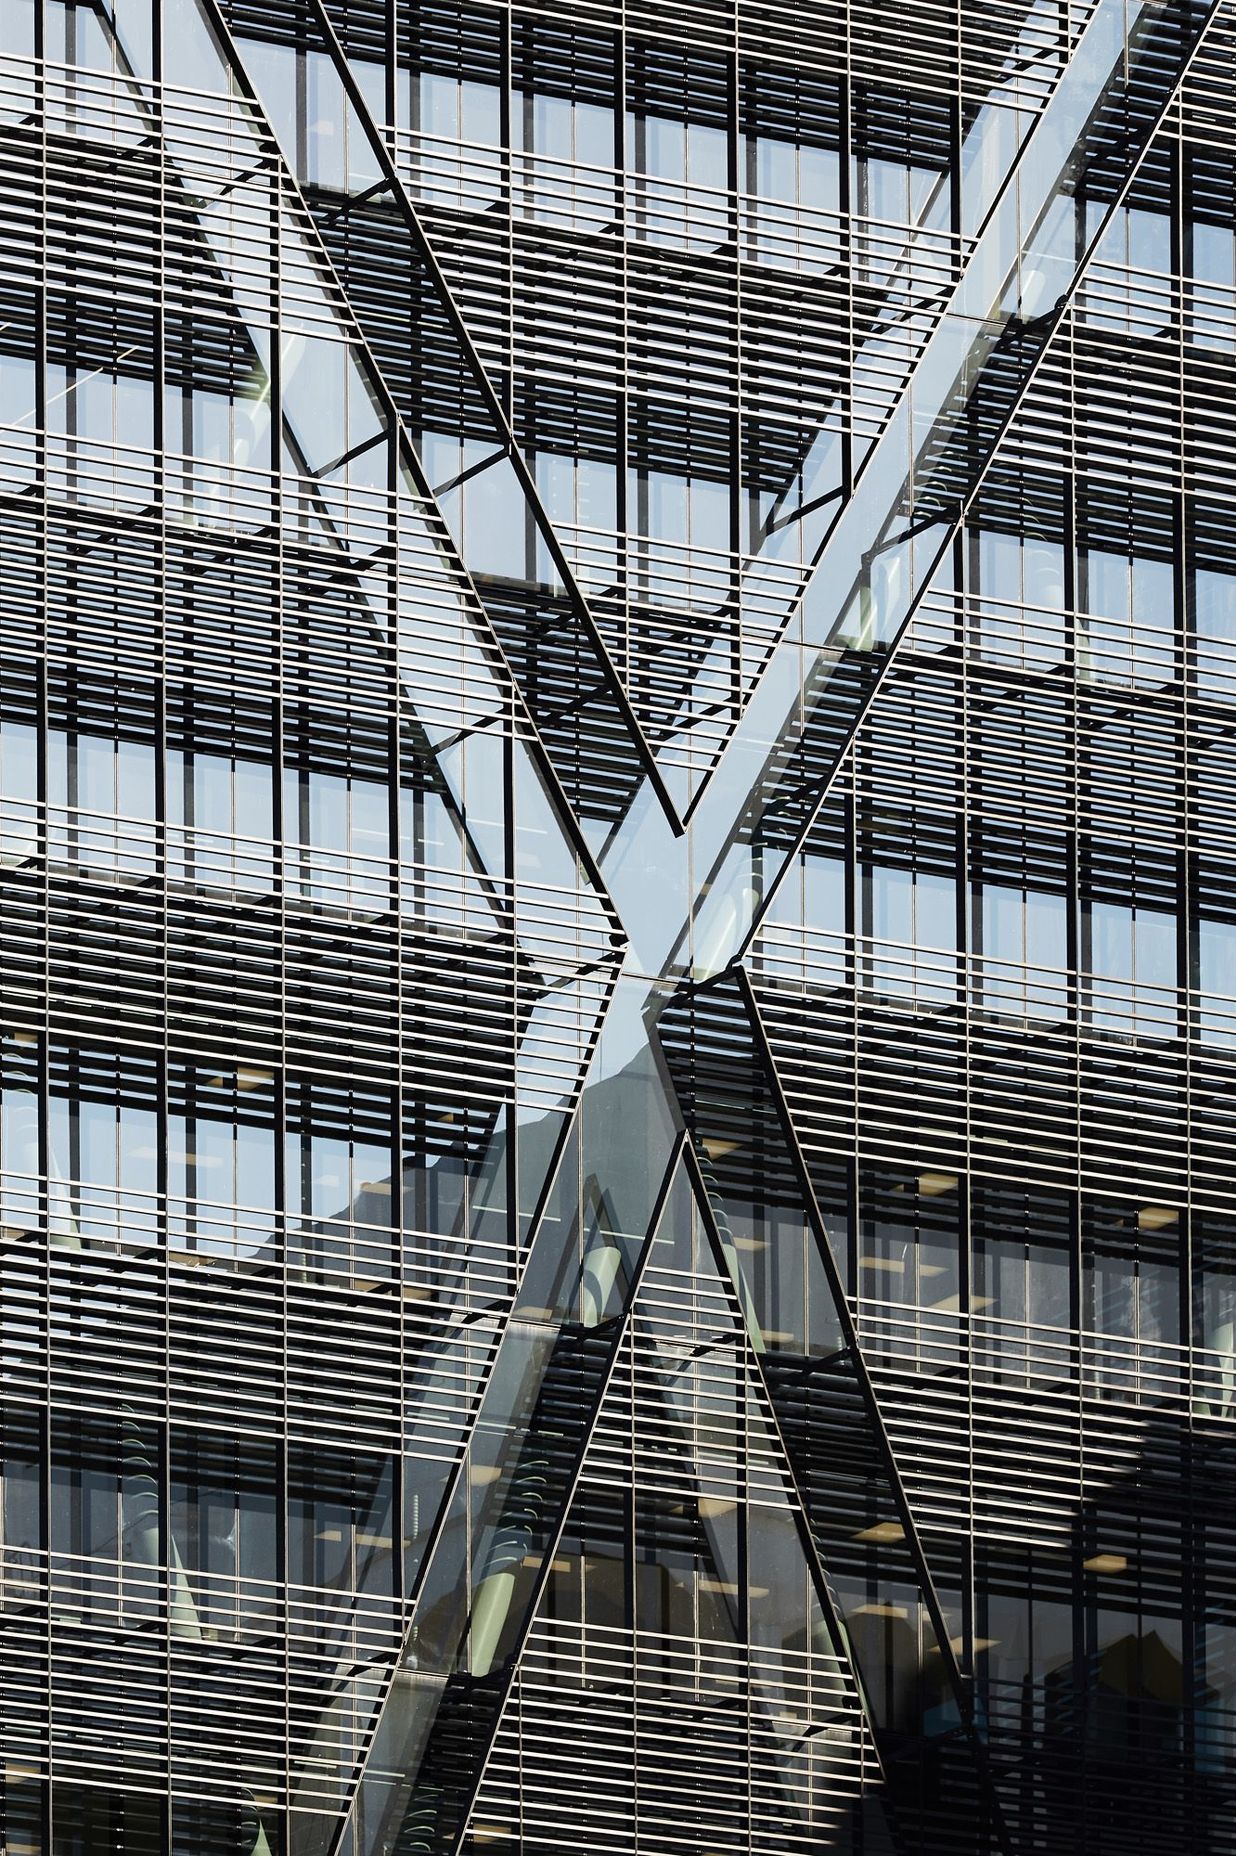 The diagrid is expressed throughout the building, including the sunshading.